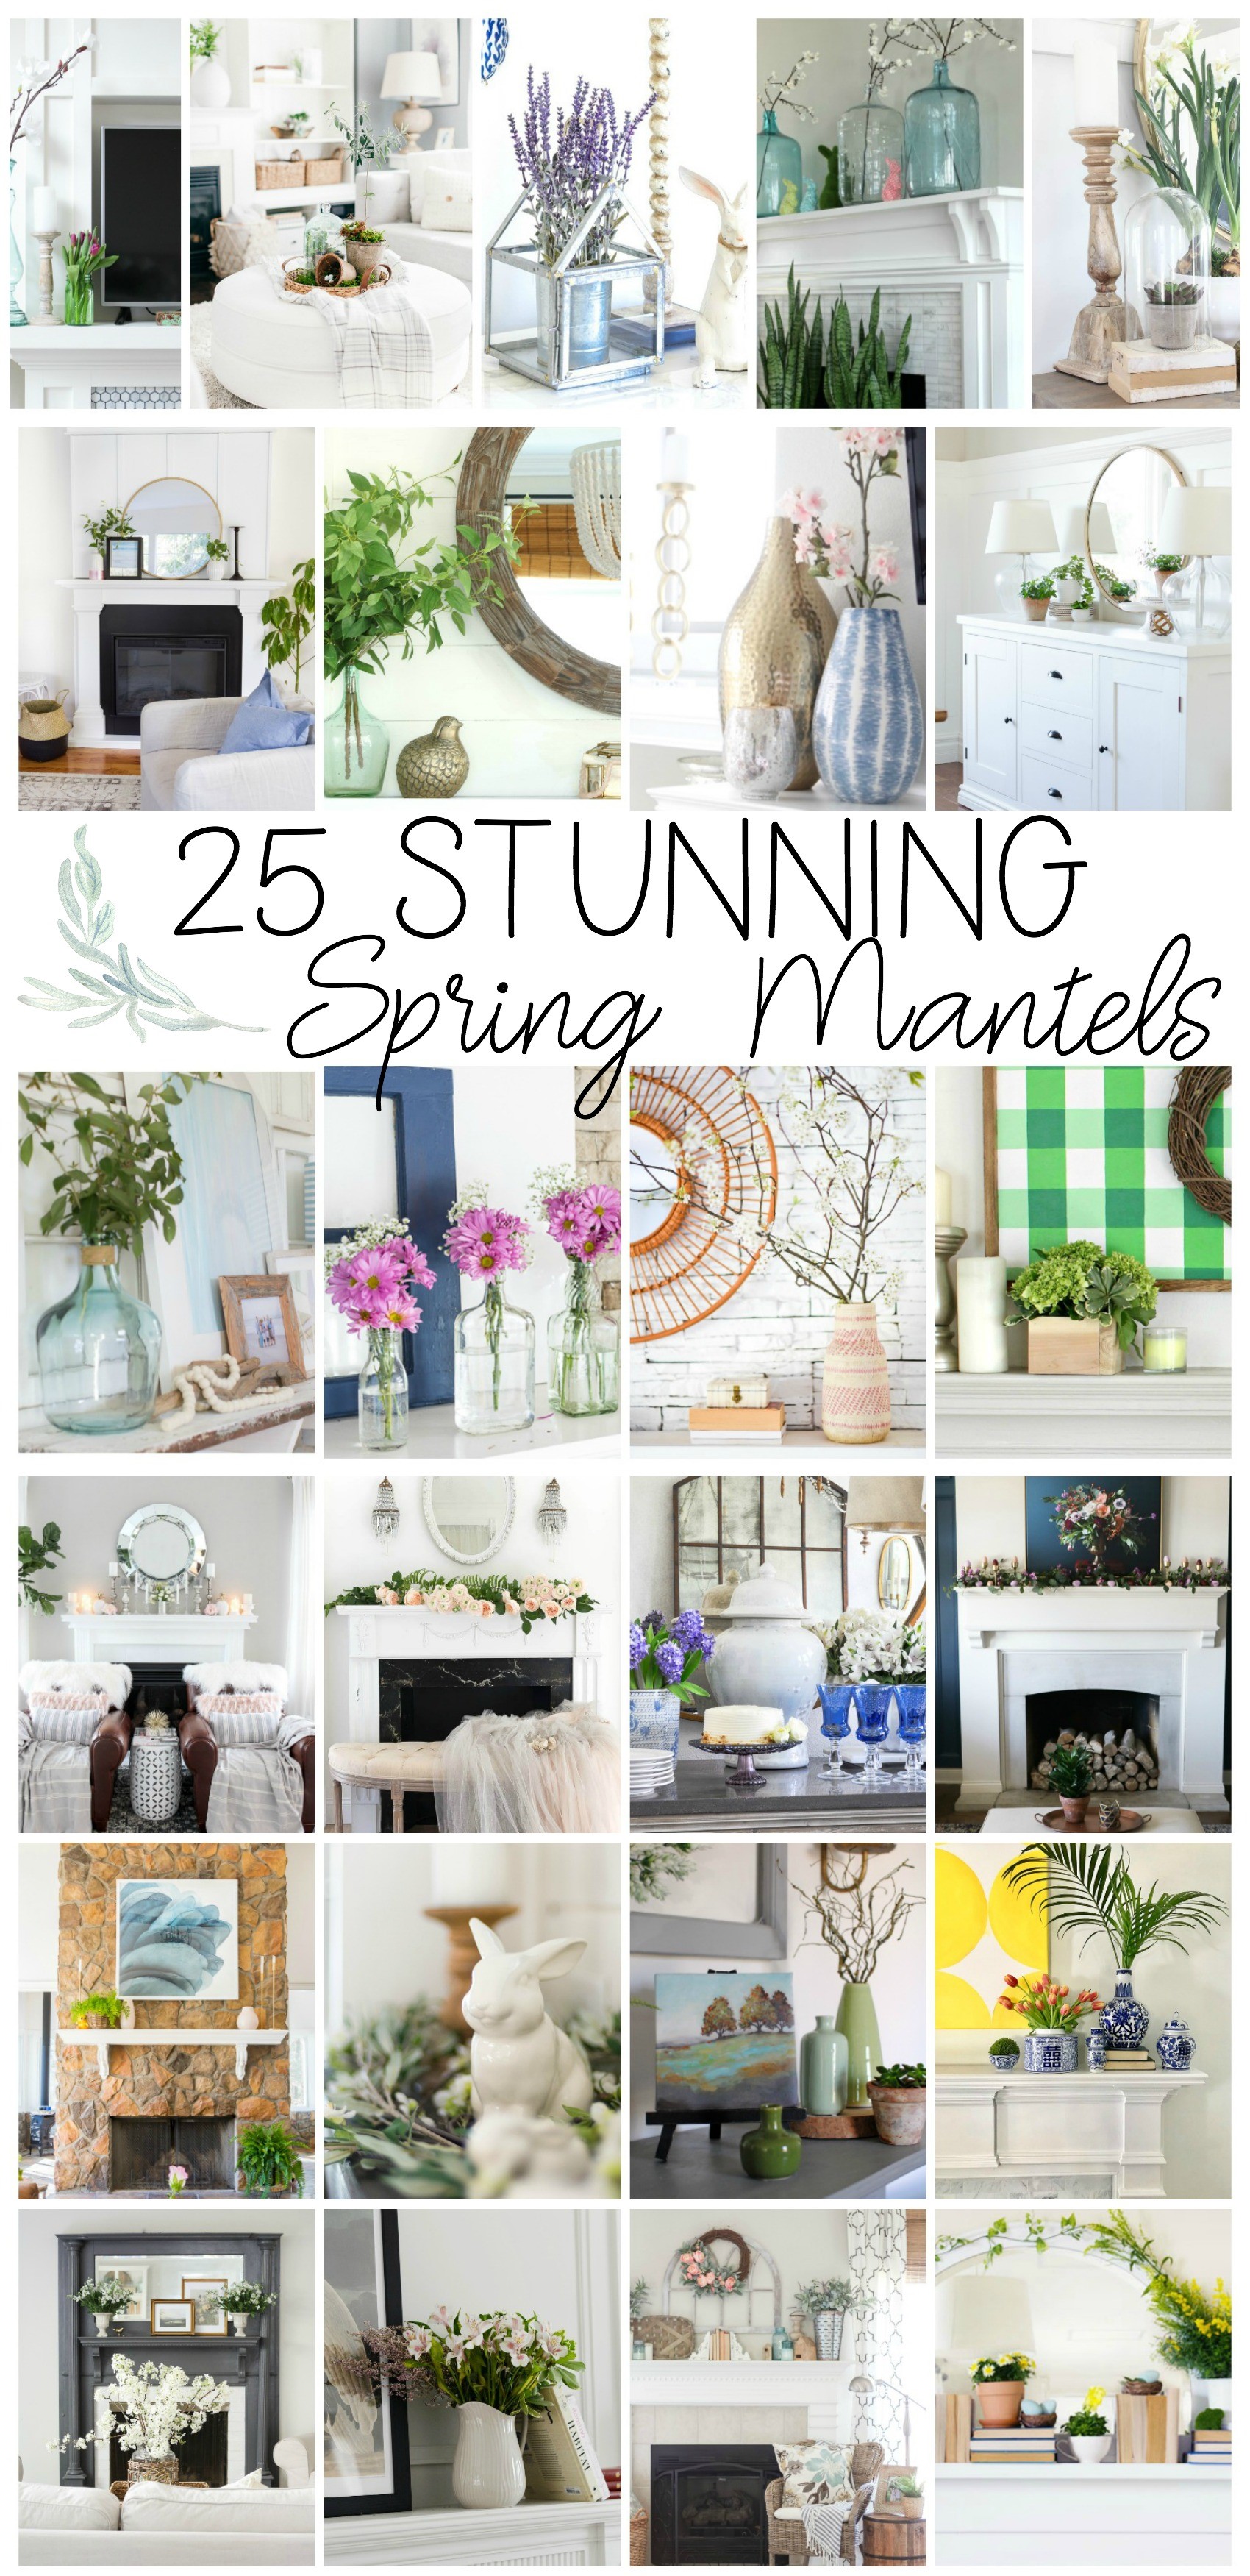 Adding a touch of blush to your Spring Mantel